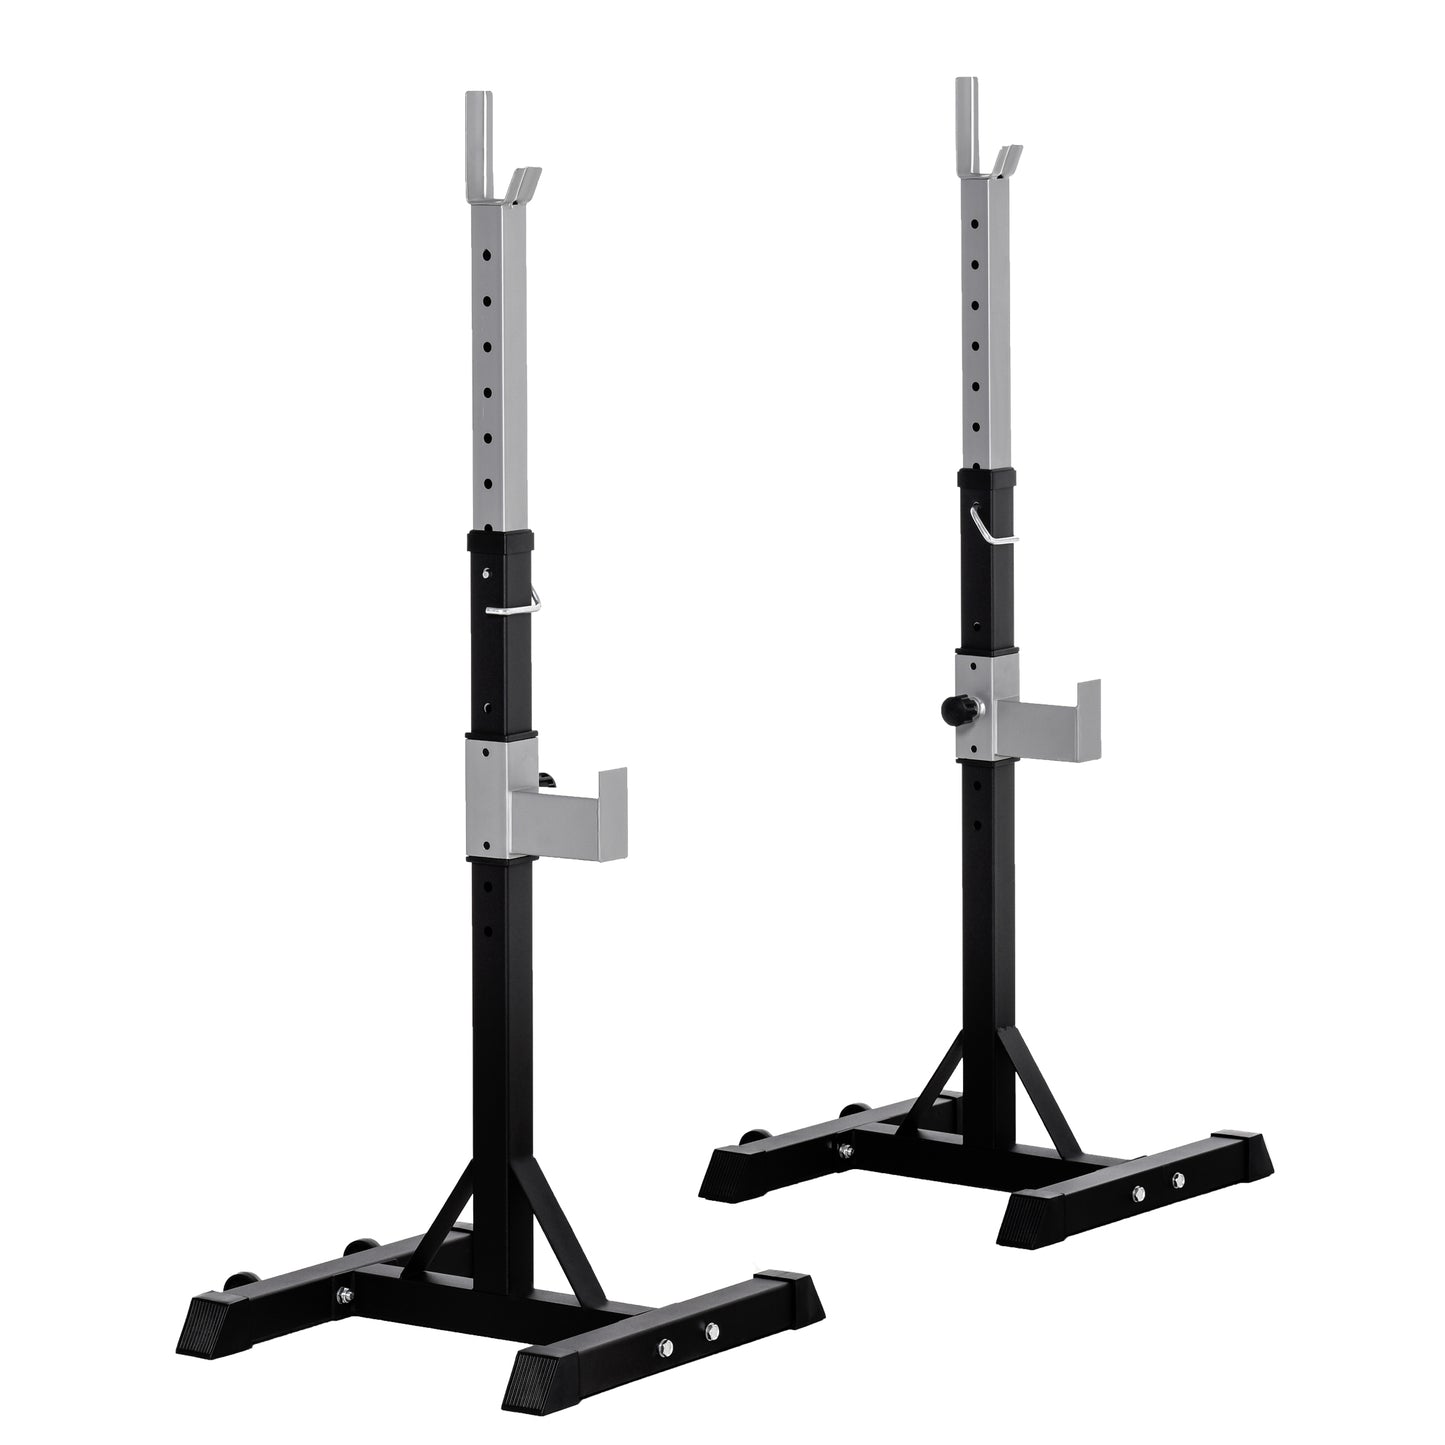 HOMCOM 2 Pairs of Barbell Squat Rack Portable Stand Weight Lifting Bench w/ Wheels